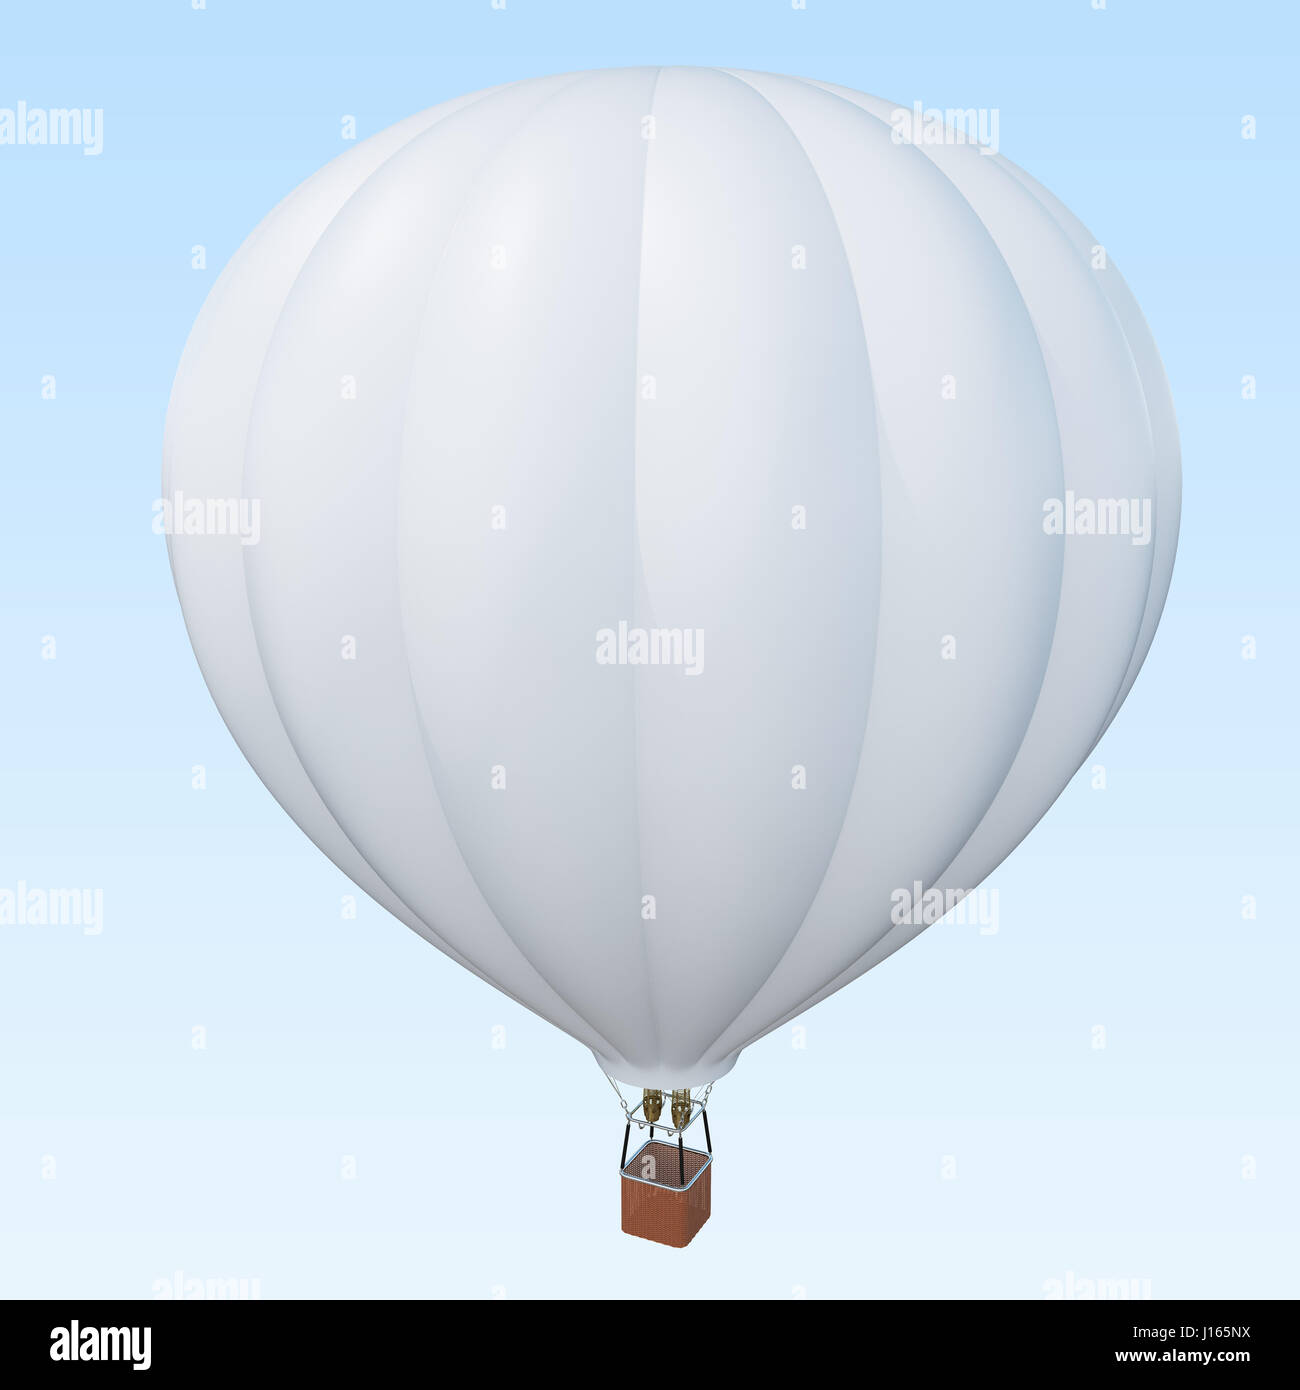 Hot air balloon with basket on skiy background with clouds. 3d rendering Stock Photo